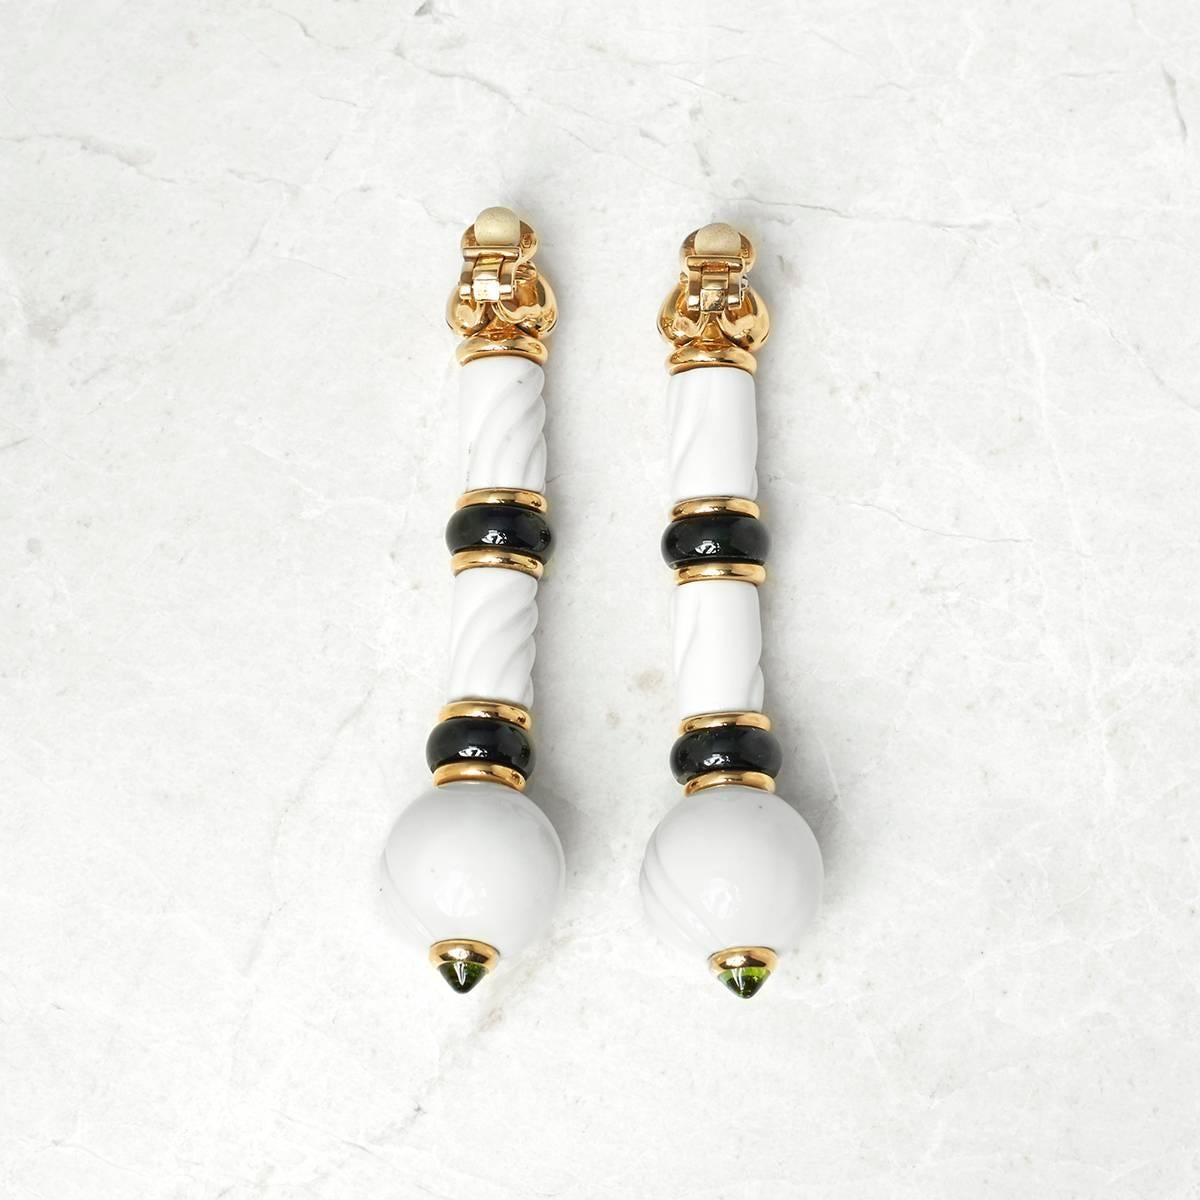 Code: COM936
Brand: Bulgari
Description: 18k Yellow Gold & Porcelain Green Tourmaline Chandra Earrings
Accompanied With: Box Only
Gender: Ladies
Earring Length: 7.2cm
Earring Width: 1.7cm
Earring Back: Omega
Condition: 9
Material: Other
Total